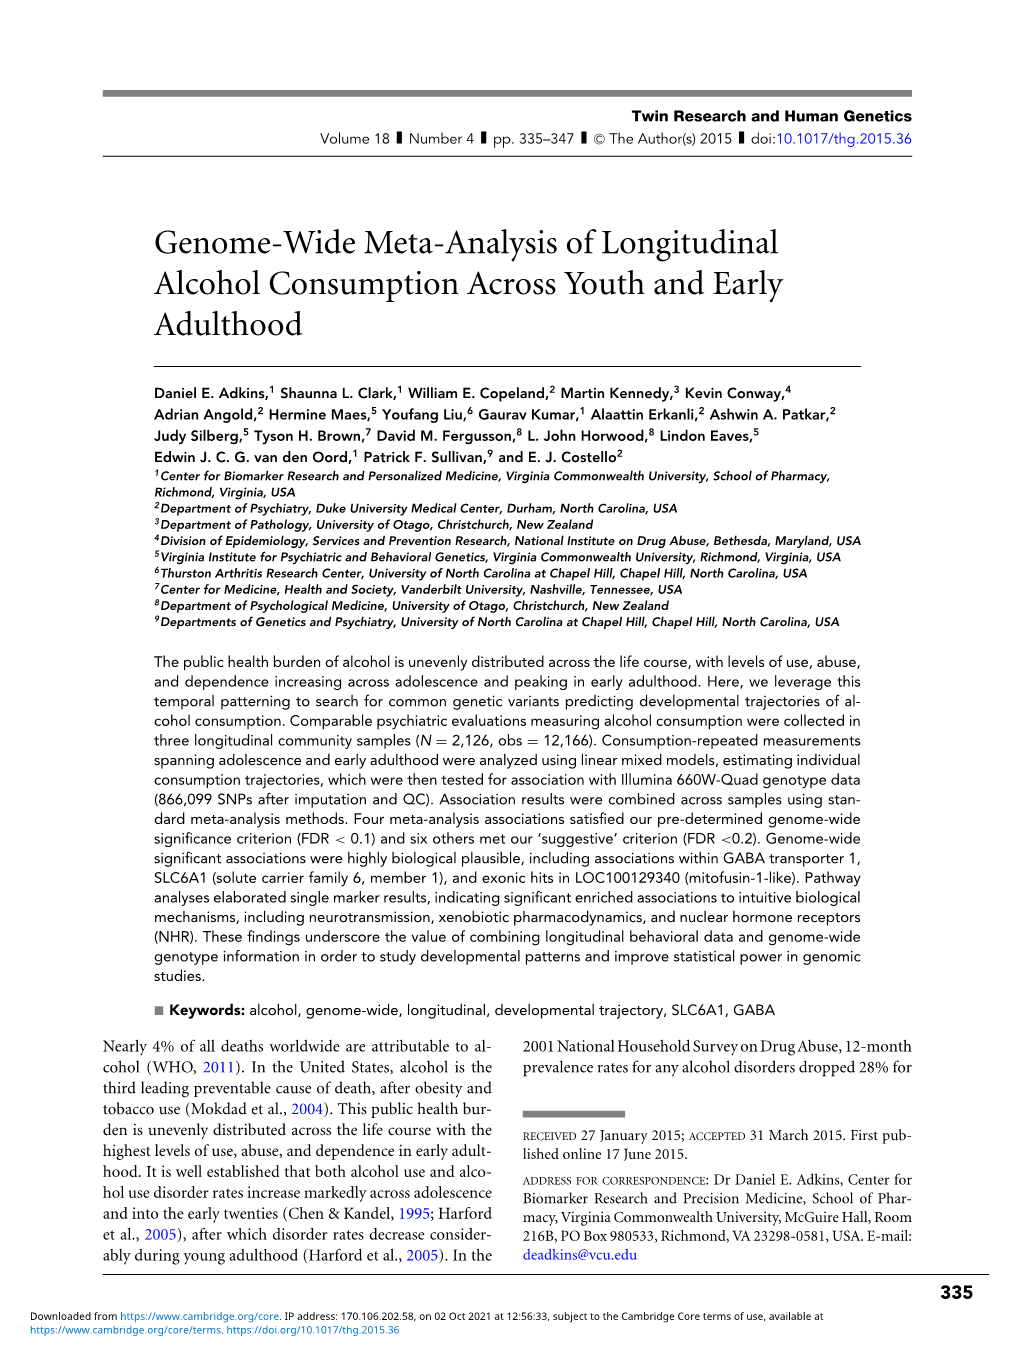 Genome-Wide Meta-Analysis of Longitudinal Alcohol Consumption Across Youth and Early Adulthood